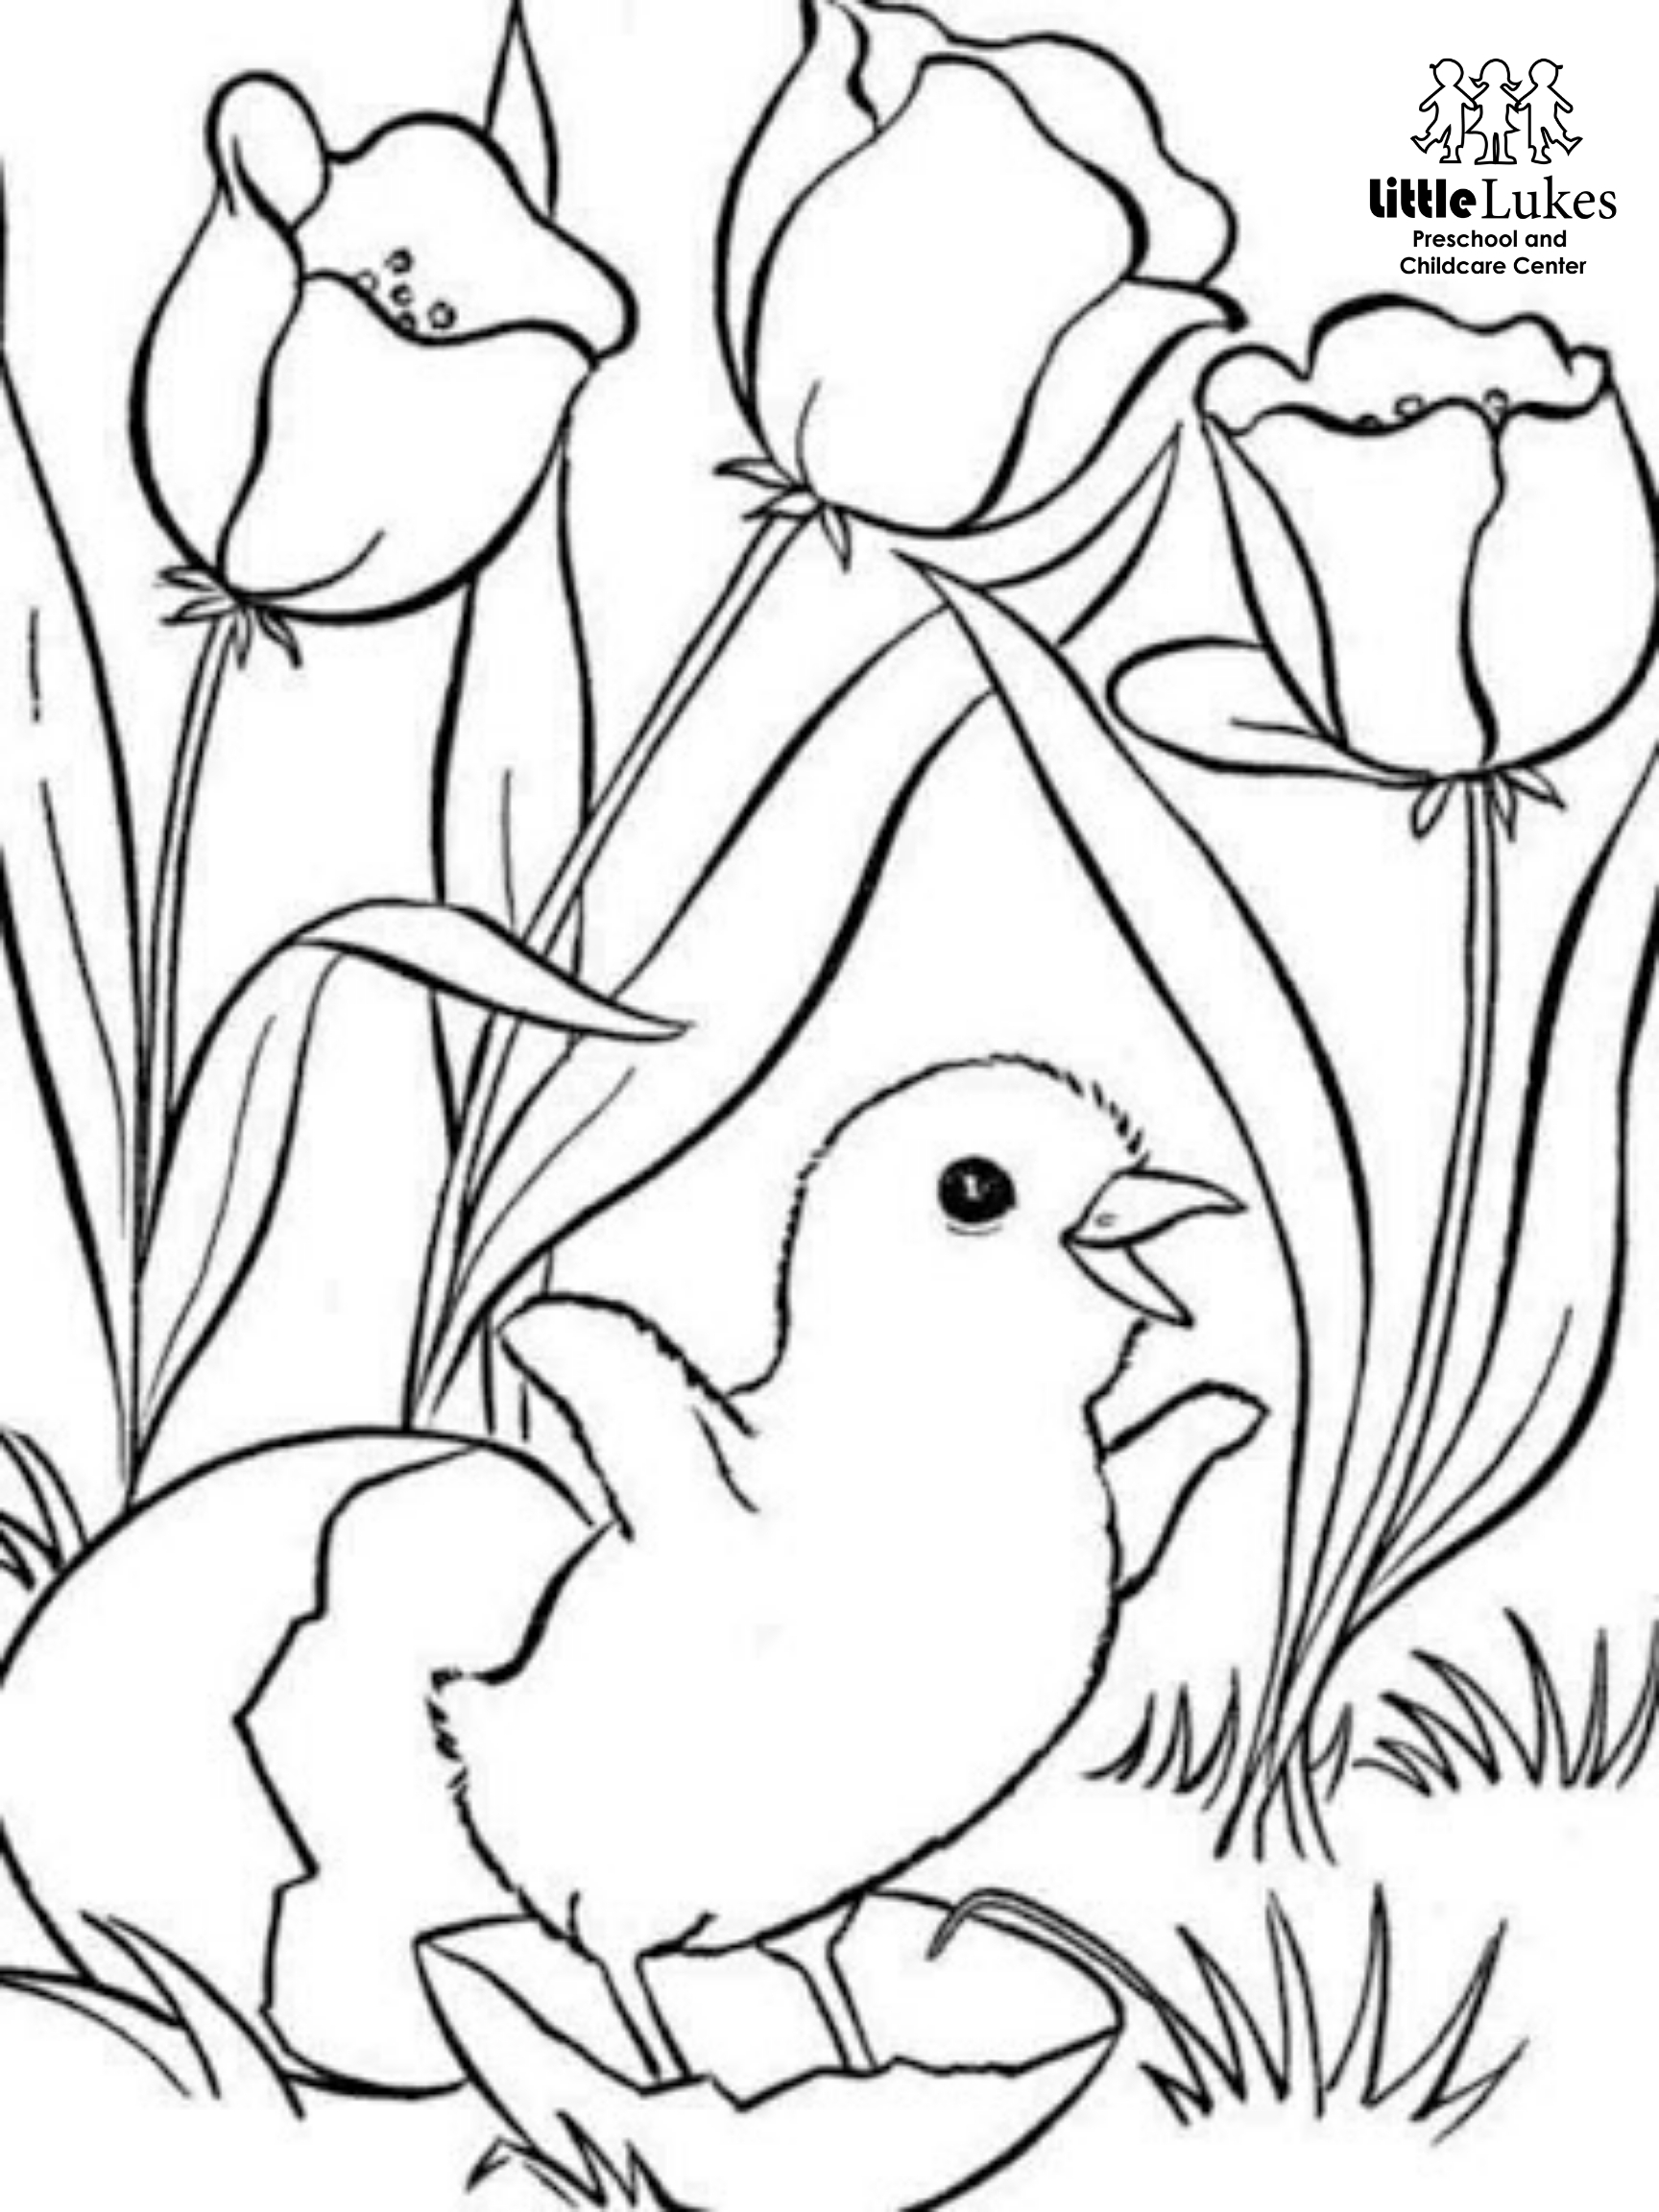 Download FREE Spring Coloring Pages! | Little Lukes Preschool and ...